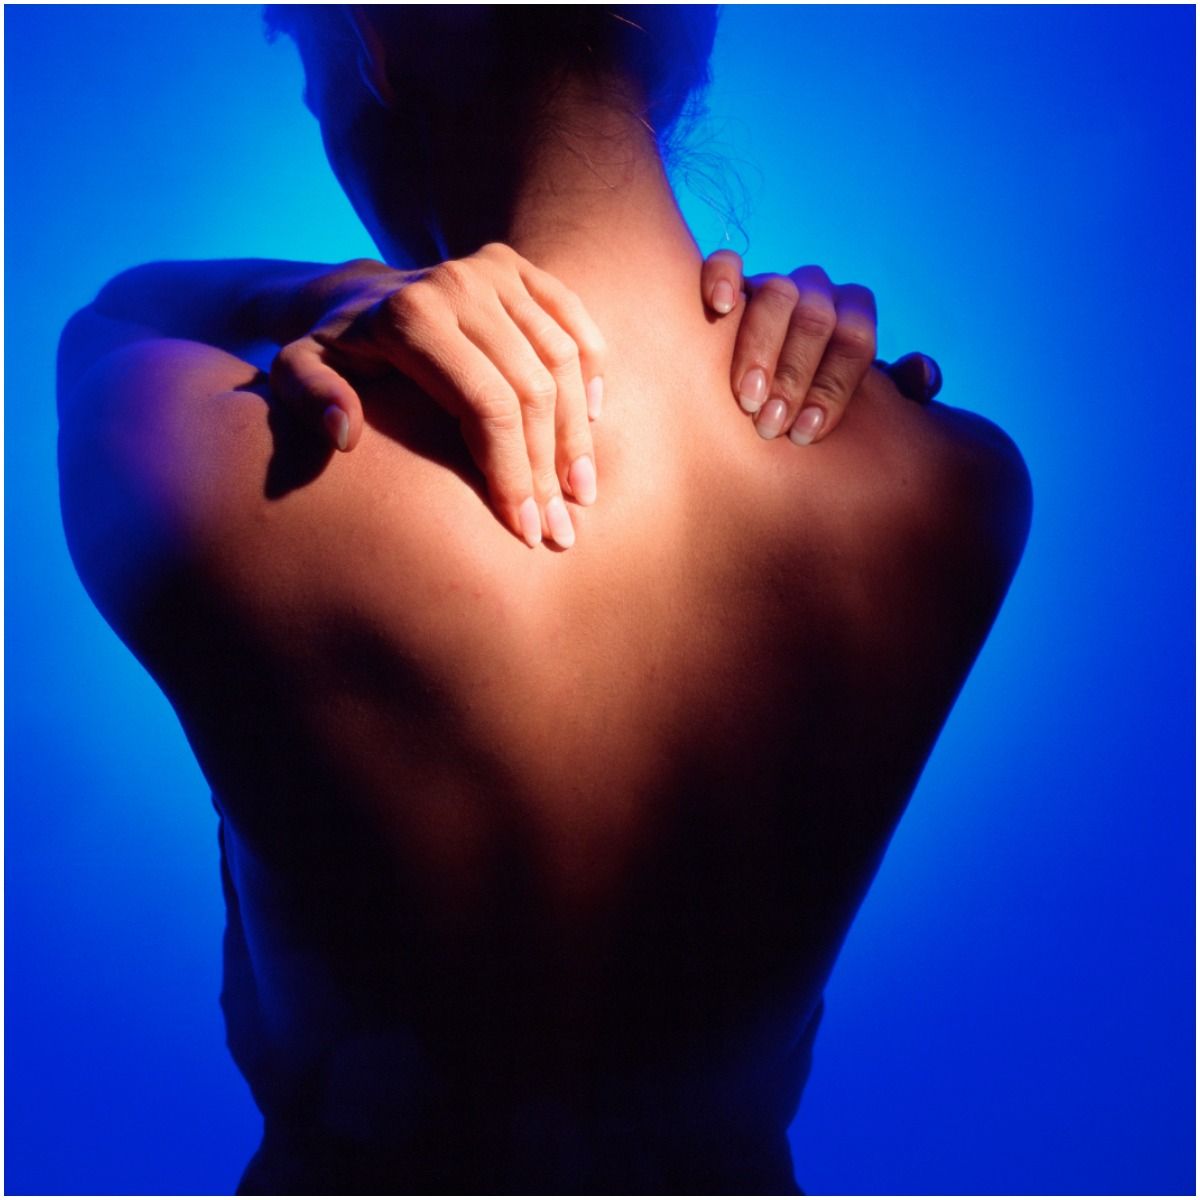 Spiritual meaning of upper back pain